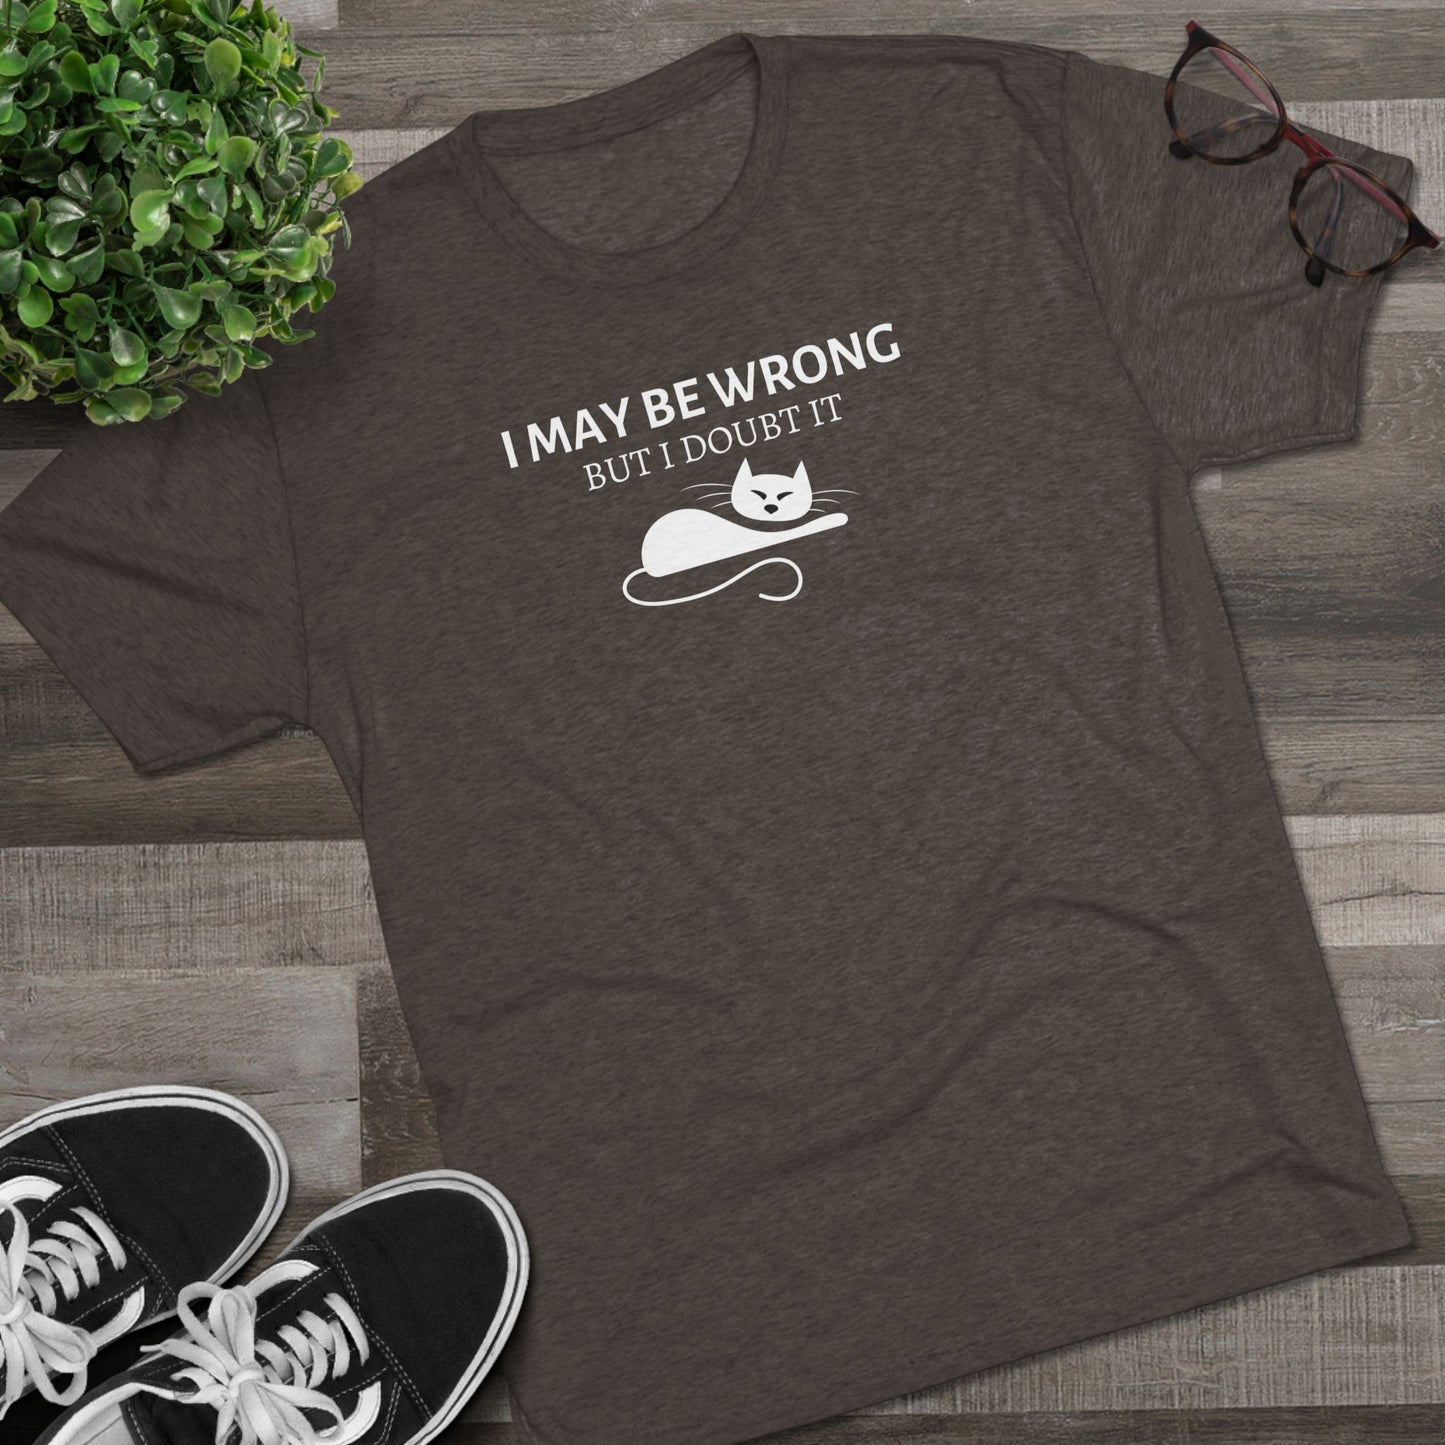 I May Be Wrong Unisex Tri - Blend Crew Tee - T - Shirt - Epileptic Al’s Shop